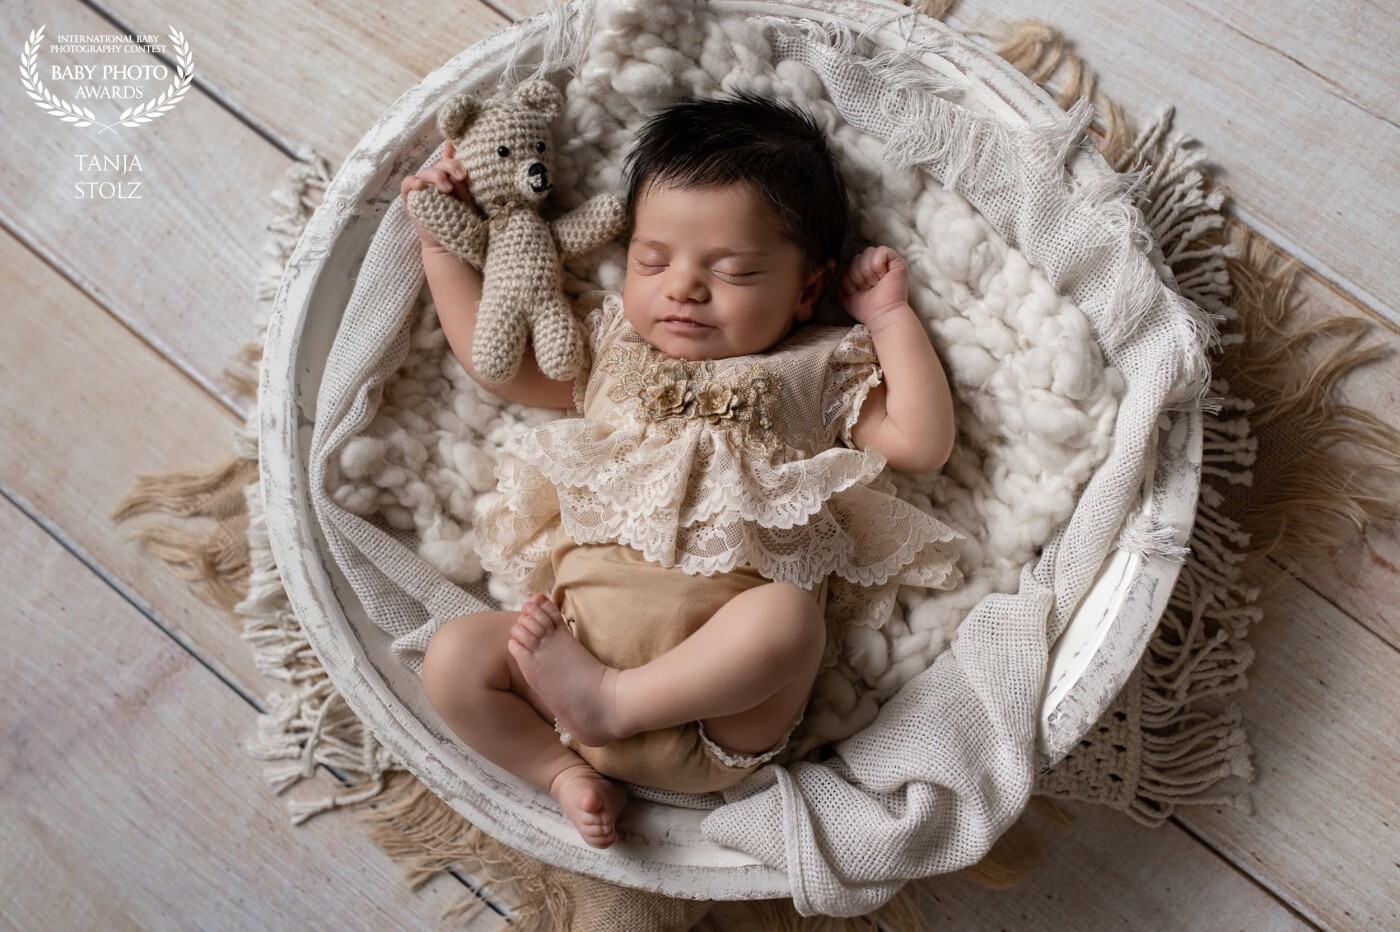 Having a newborn baby client is always a little surprise for me. This time I was lucky having such a cute little girl with great hair in my studio. She was adorable, we did behind the scenes, wrapping tutorials and even a short video during her newborn session and she just slept.